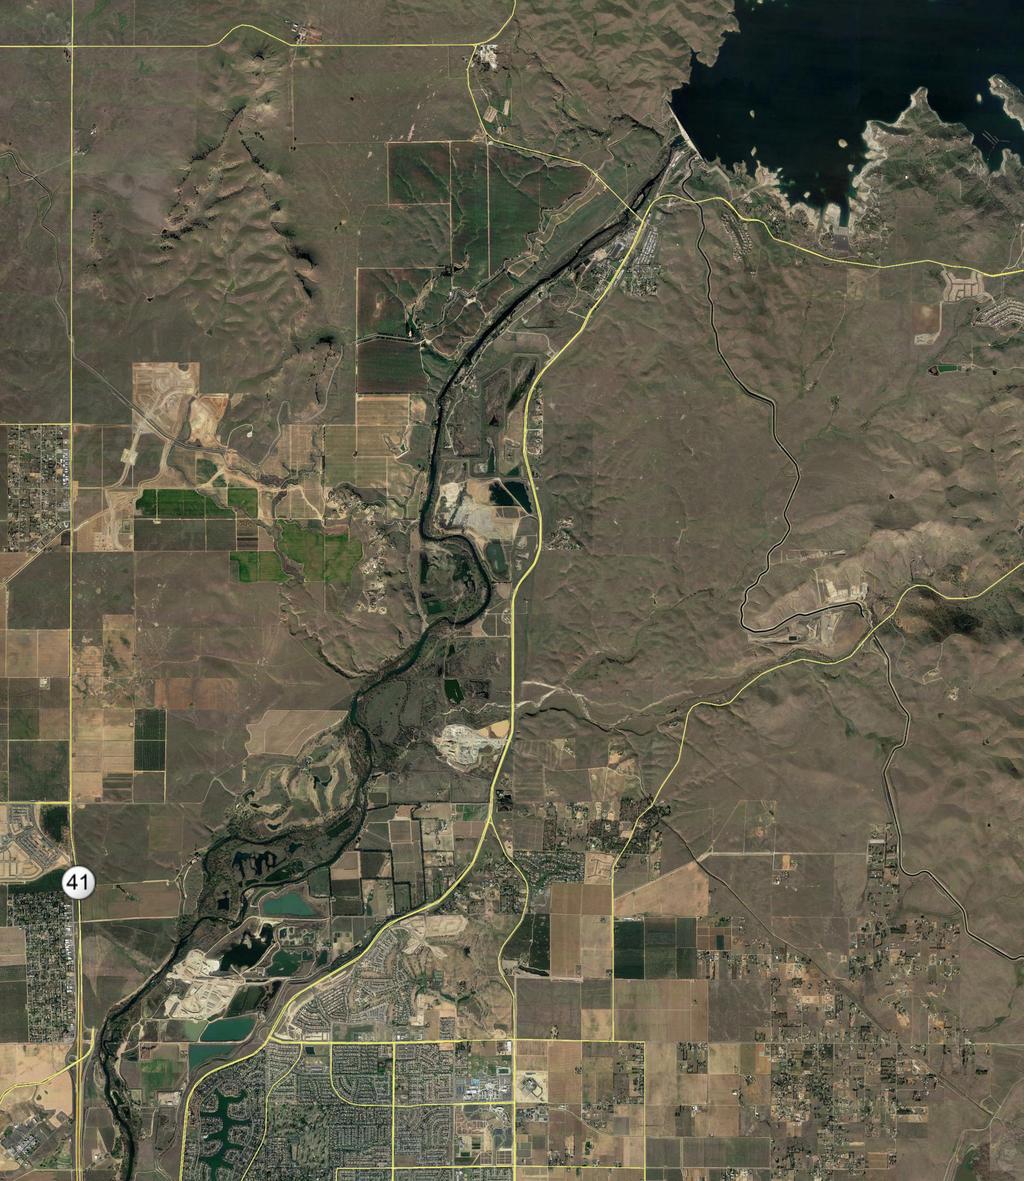 FOR SALE ±1,221 ACRES 145 SUBJECT PROPERTY Part of North Shore at Millerton Lake PLANNED COMMUNITIES NORTH OF FRESNO Fresno County Millerton Newtown: 3,500 Units ±2,000 acres Friant Ranch: 2,500